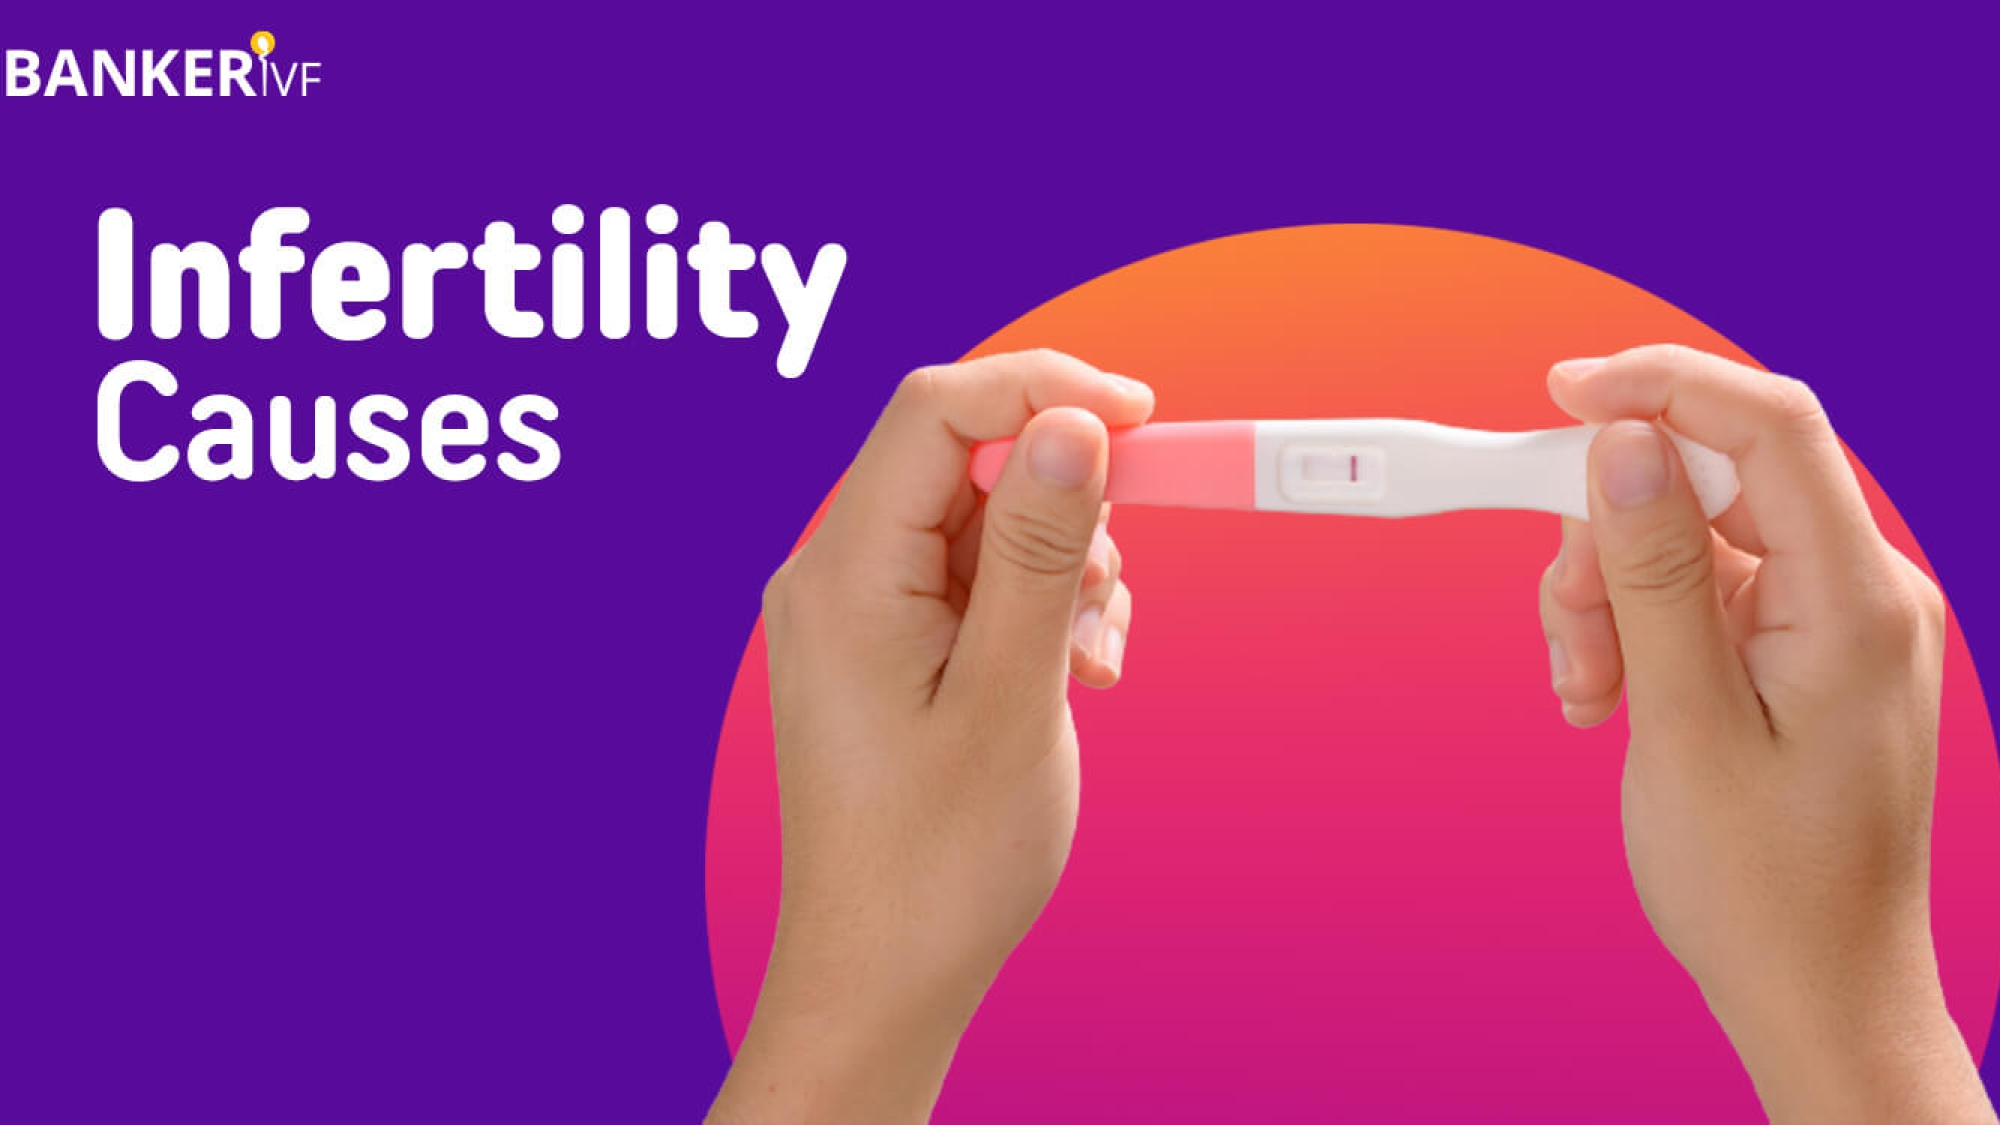 Infertility-Causes-Dr.Banker-02